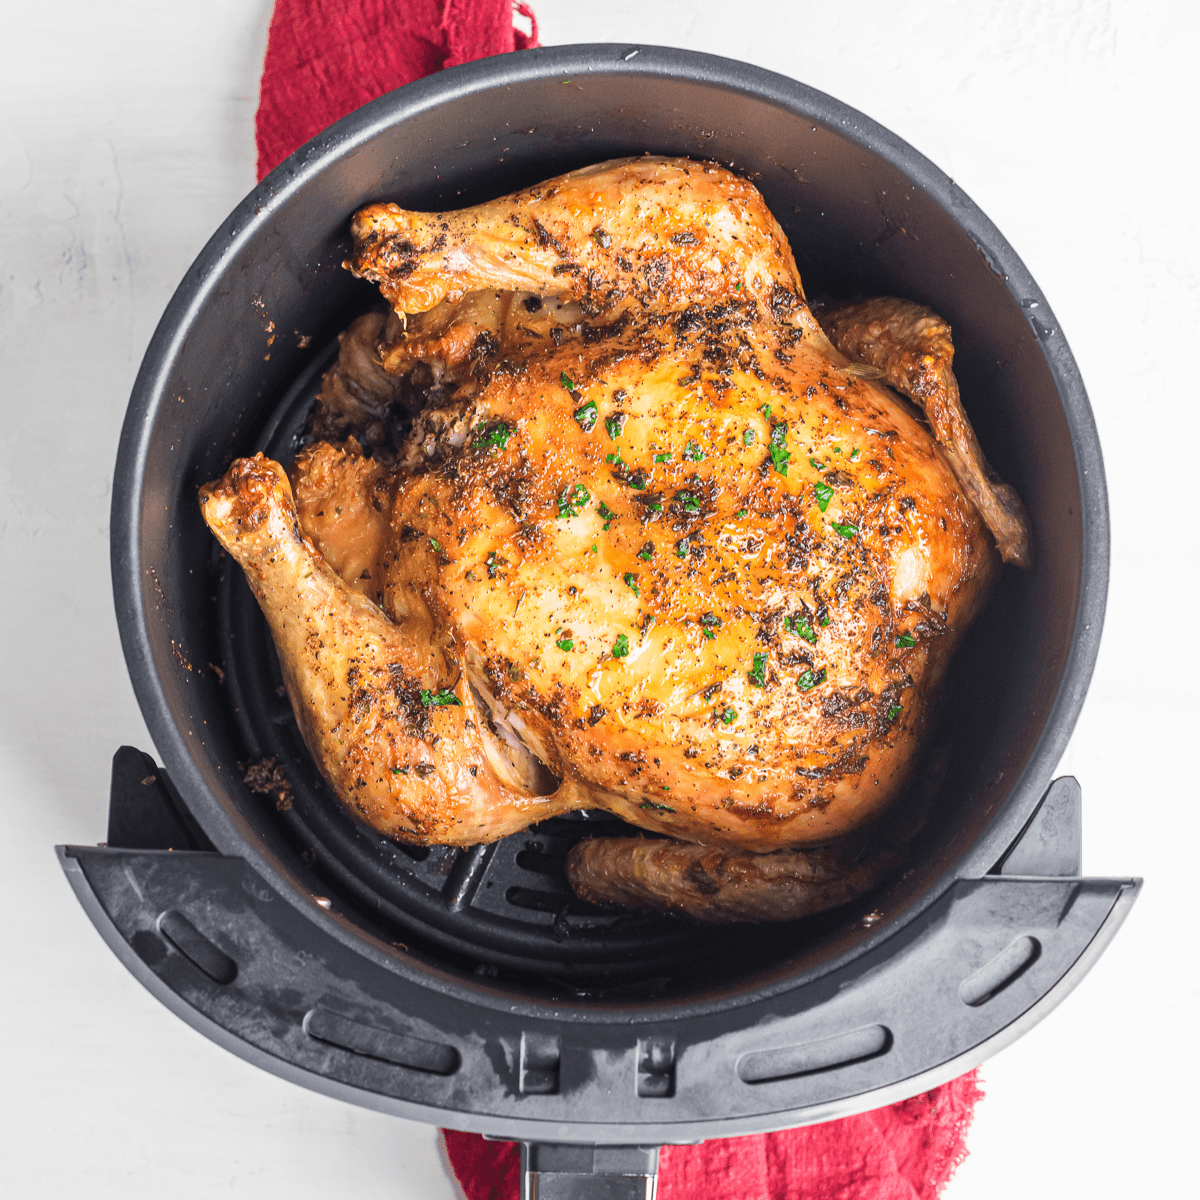 https://www.courtneyssweets.com/wp-content/uploads/2022/03/air-fryer-whole-roasted-chicken.png